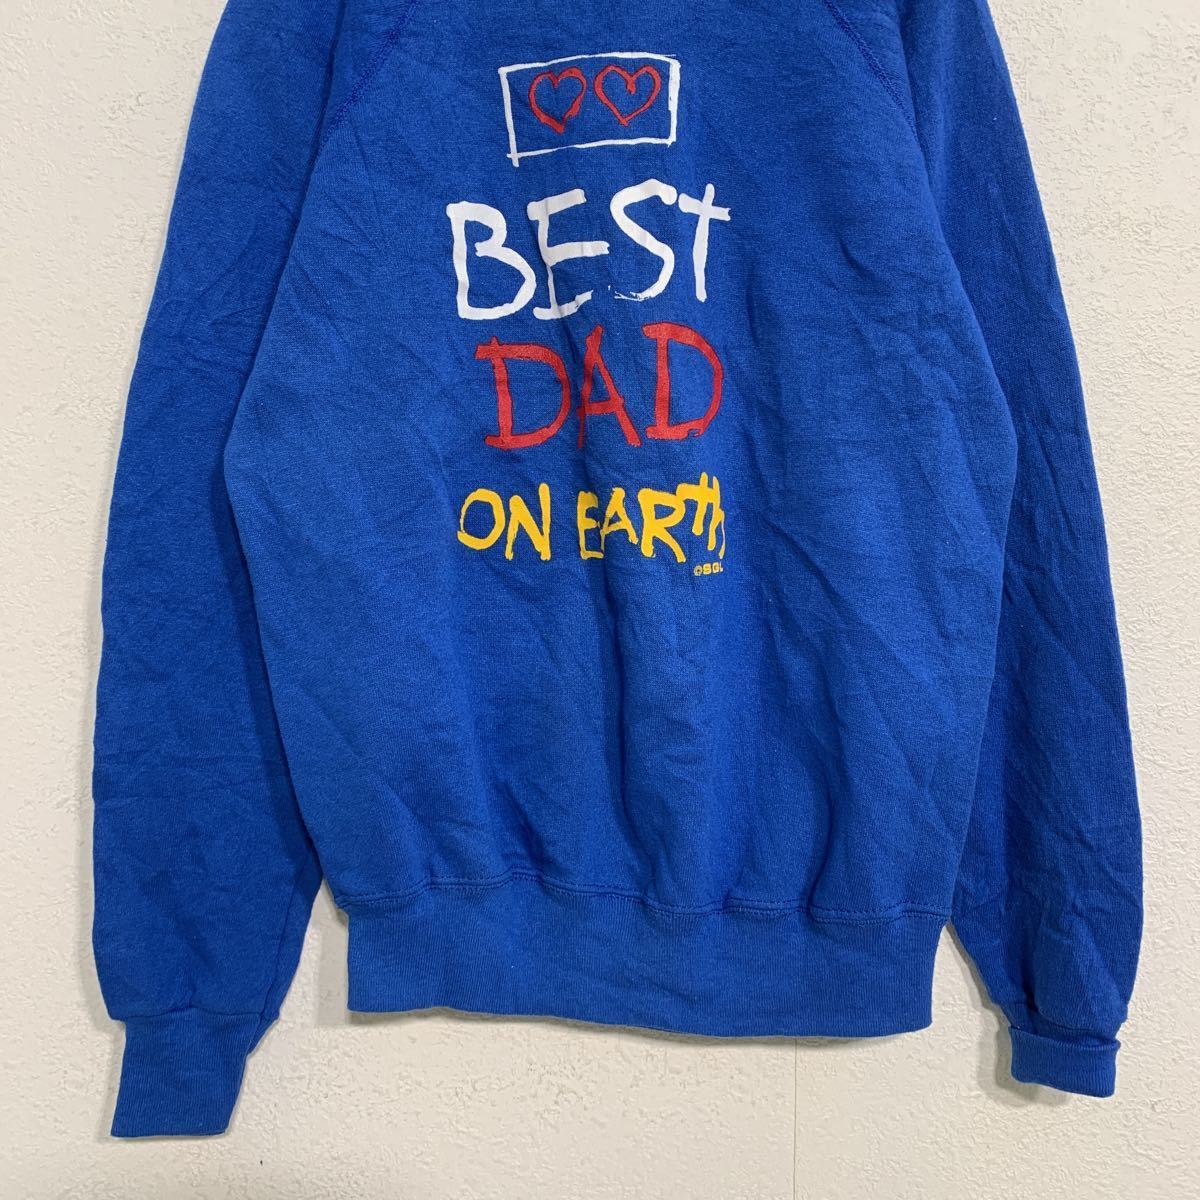 Tultex sweat sweatshirt wi men's S blue BEST DAD ON EARTH print old clothes . America stock a501-5521